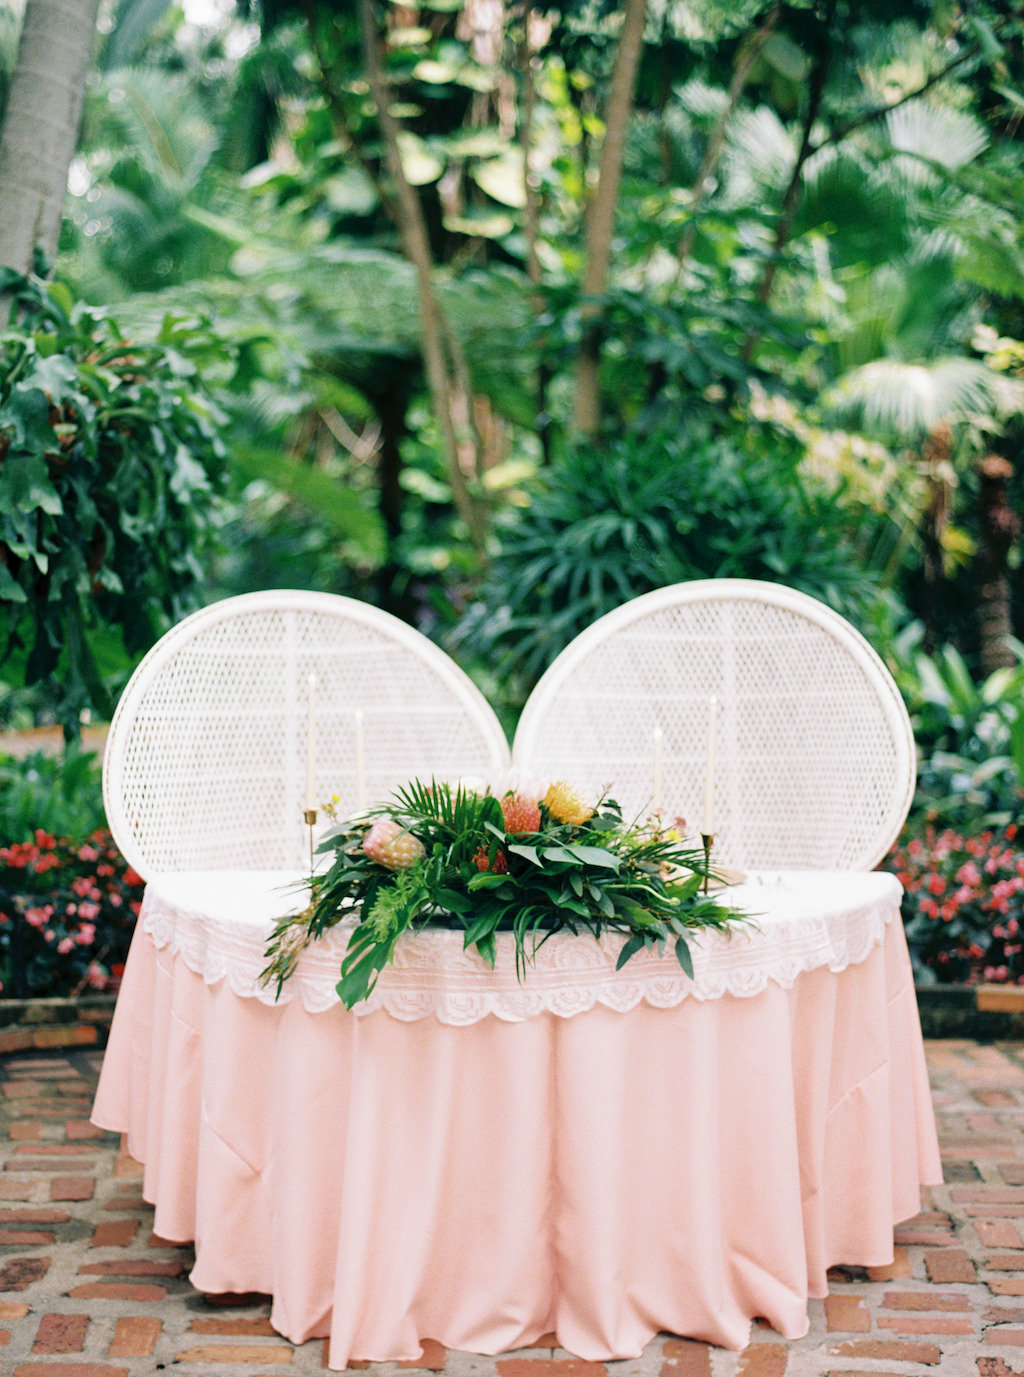 Outdoor Tropical Inspired Wedding Reception Decor, Sweetheart Table with Blush Pink and White Lace Tablecloth, Large White Wicker Chairs, and Palm Leaves, Pink and Yellow Floral Bouquet